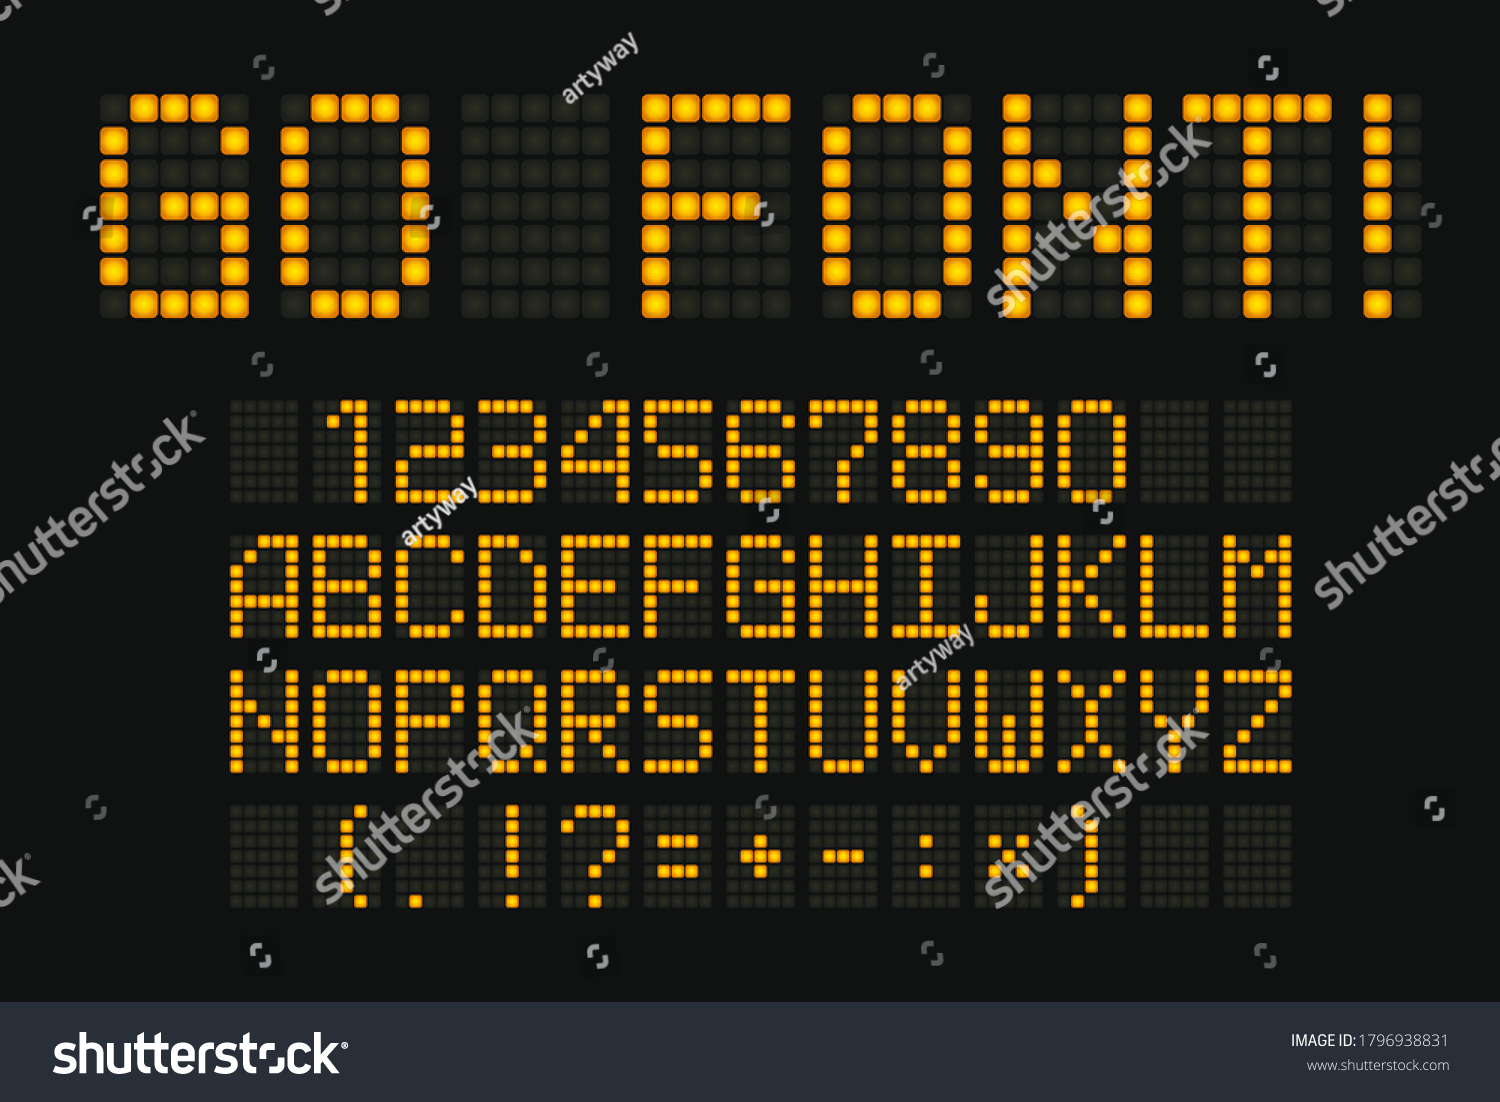 SVG of Digital font for led board, scoreboard, clock board. Yellow typeset for electronic display. Infoboard letters, signs and numbers collection on black background. svg